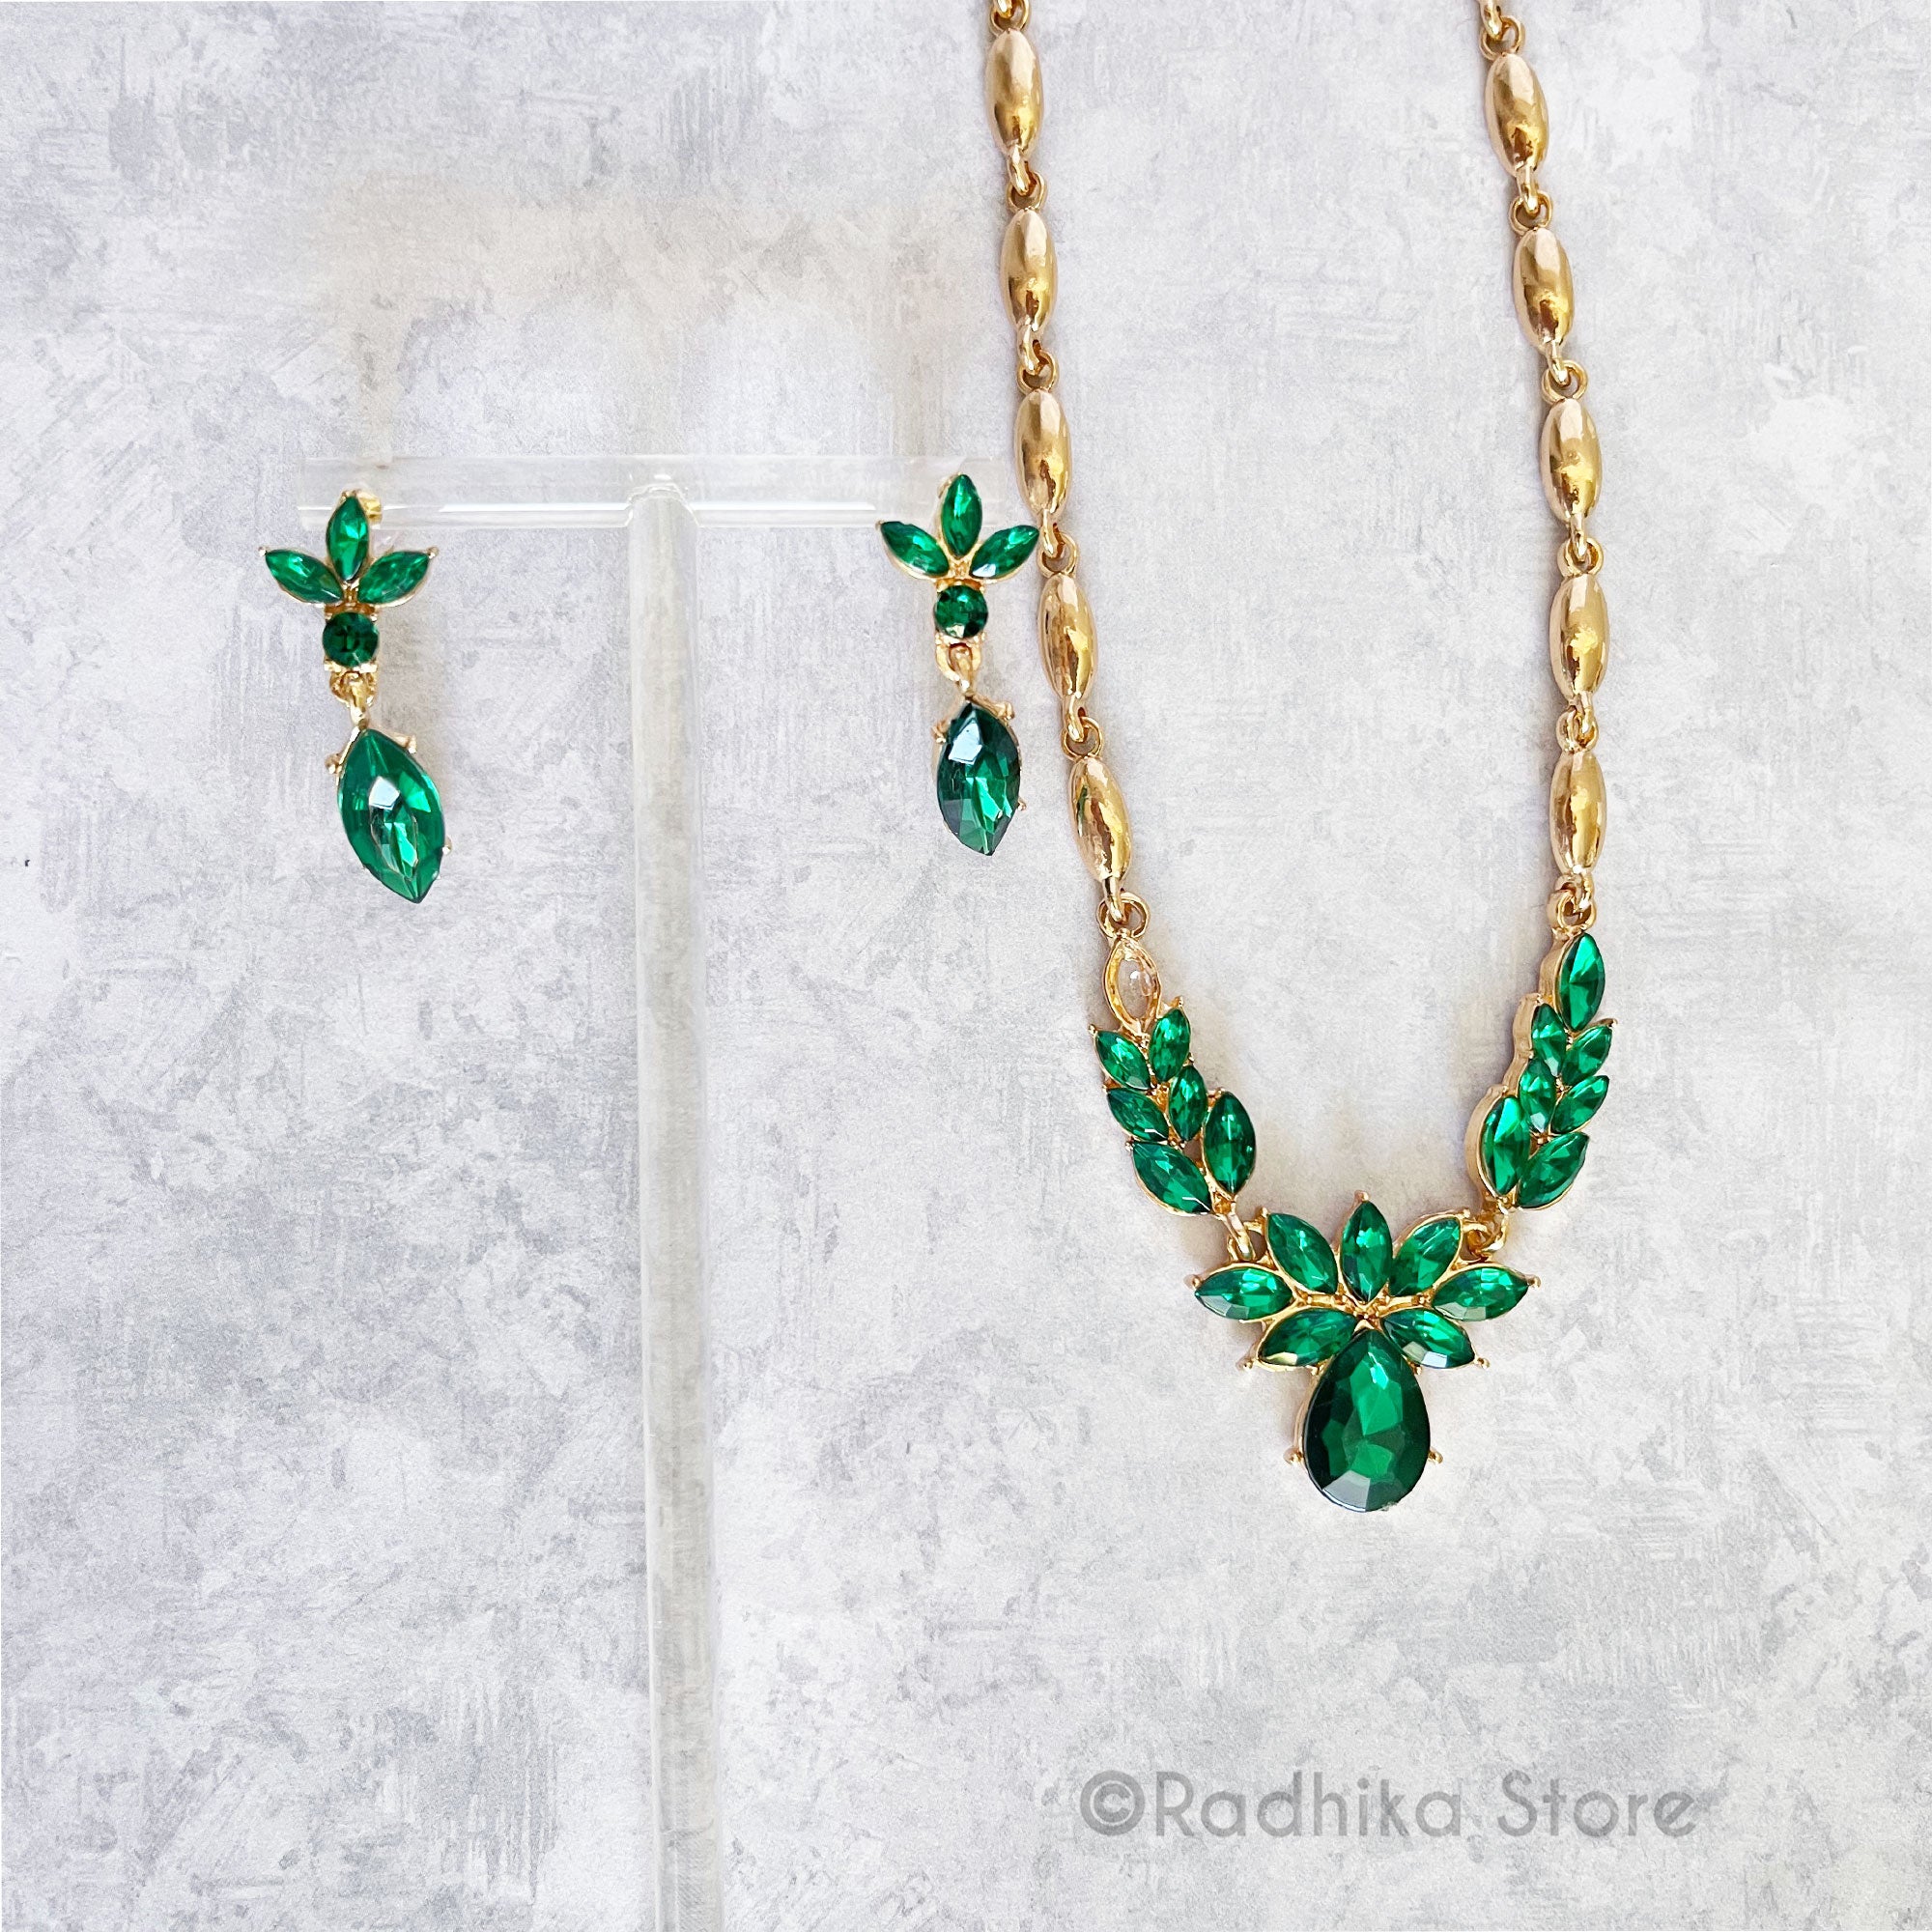 Emerald Pineapple - Deity Necklace And Earring Set